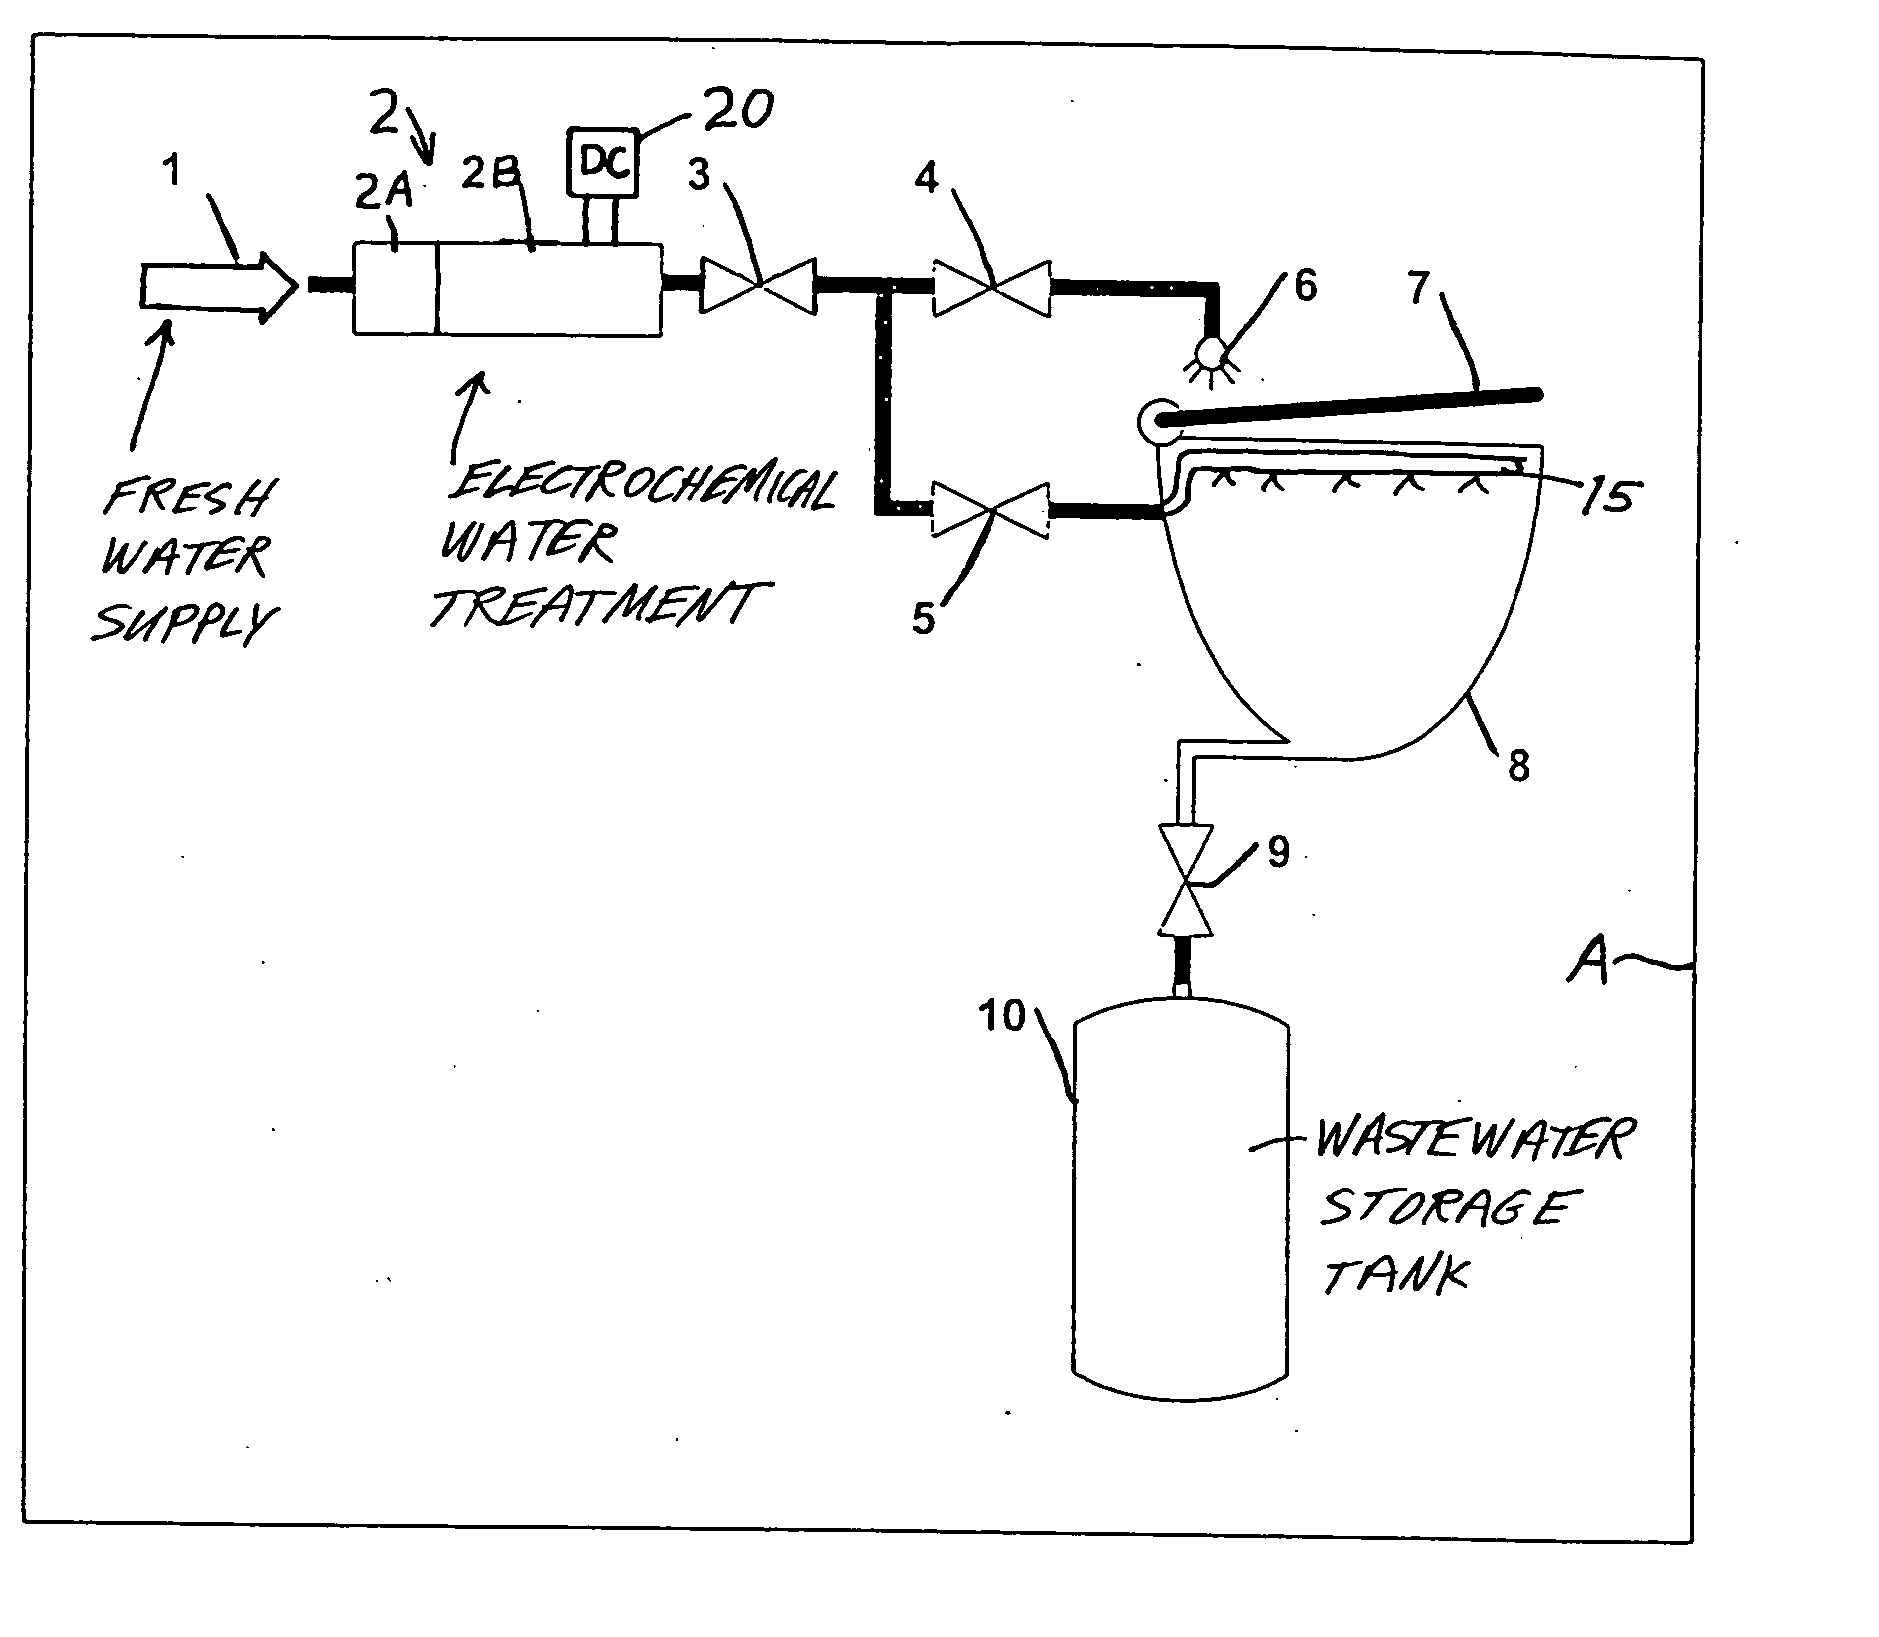 Method and apparatus for cleaning and disinfecting a toilet system in a transport vehicle such as a passenger aircraft